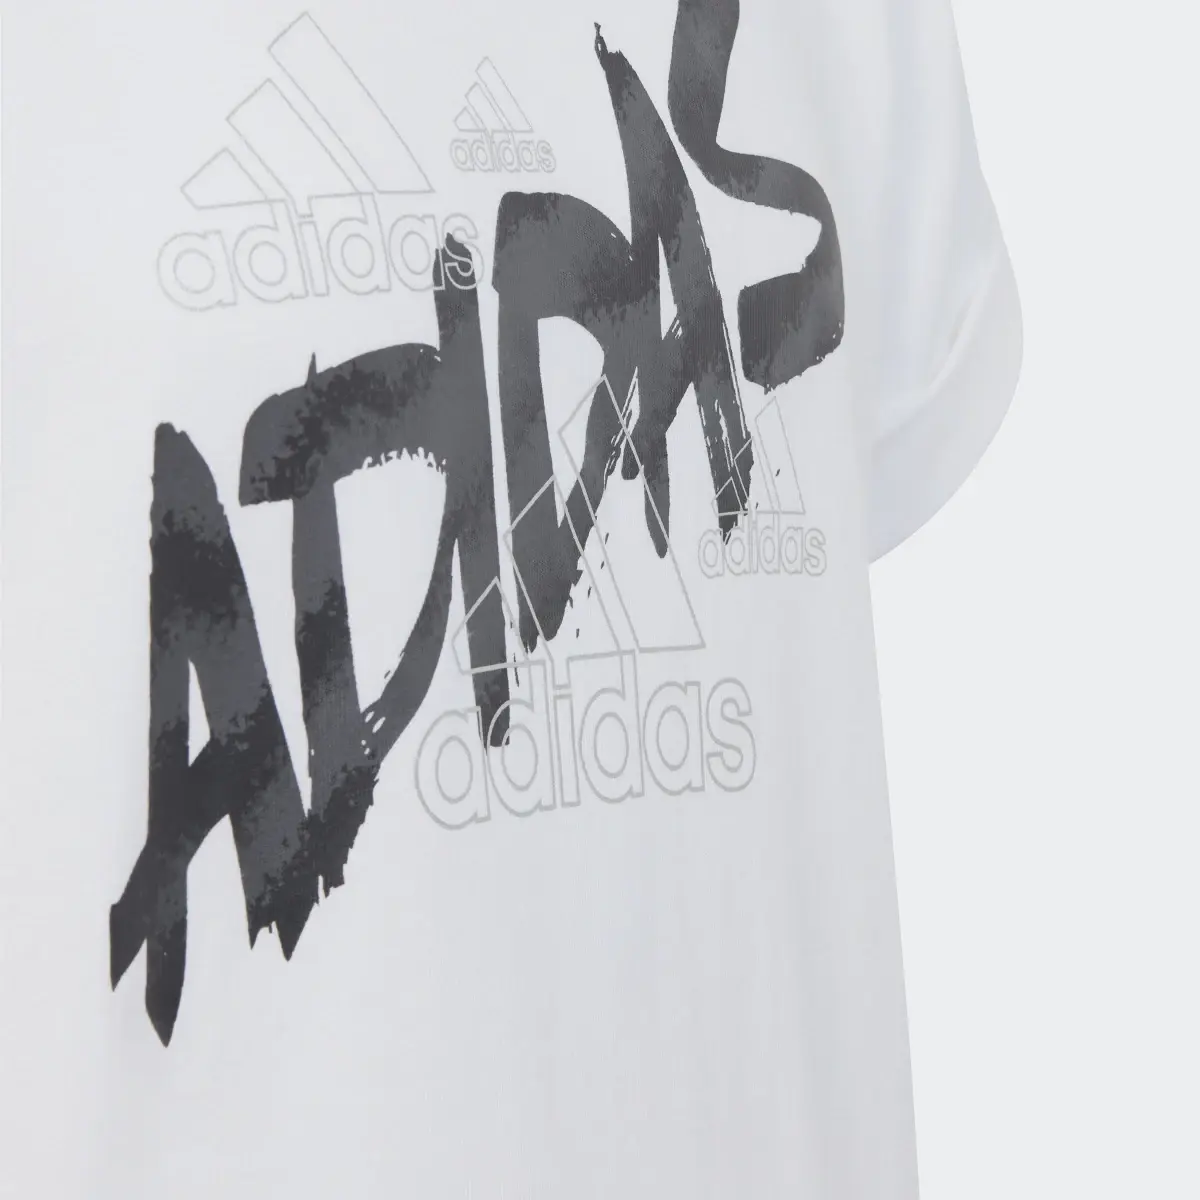 Adidas Maglia Dance Knotted. 3